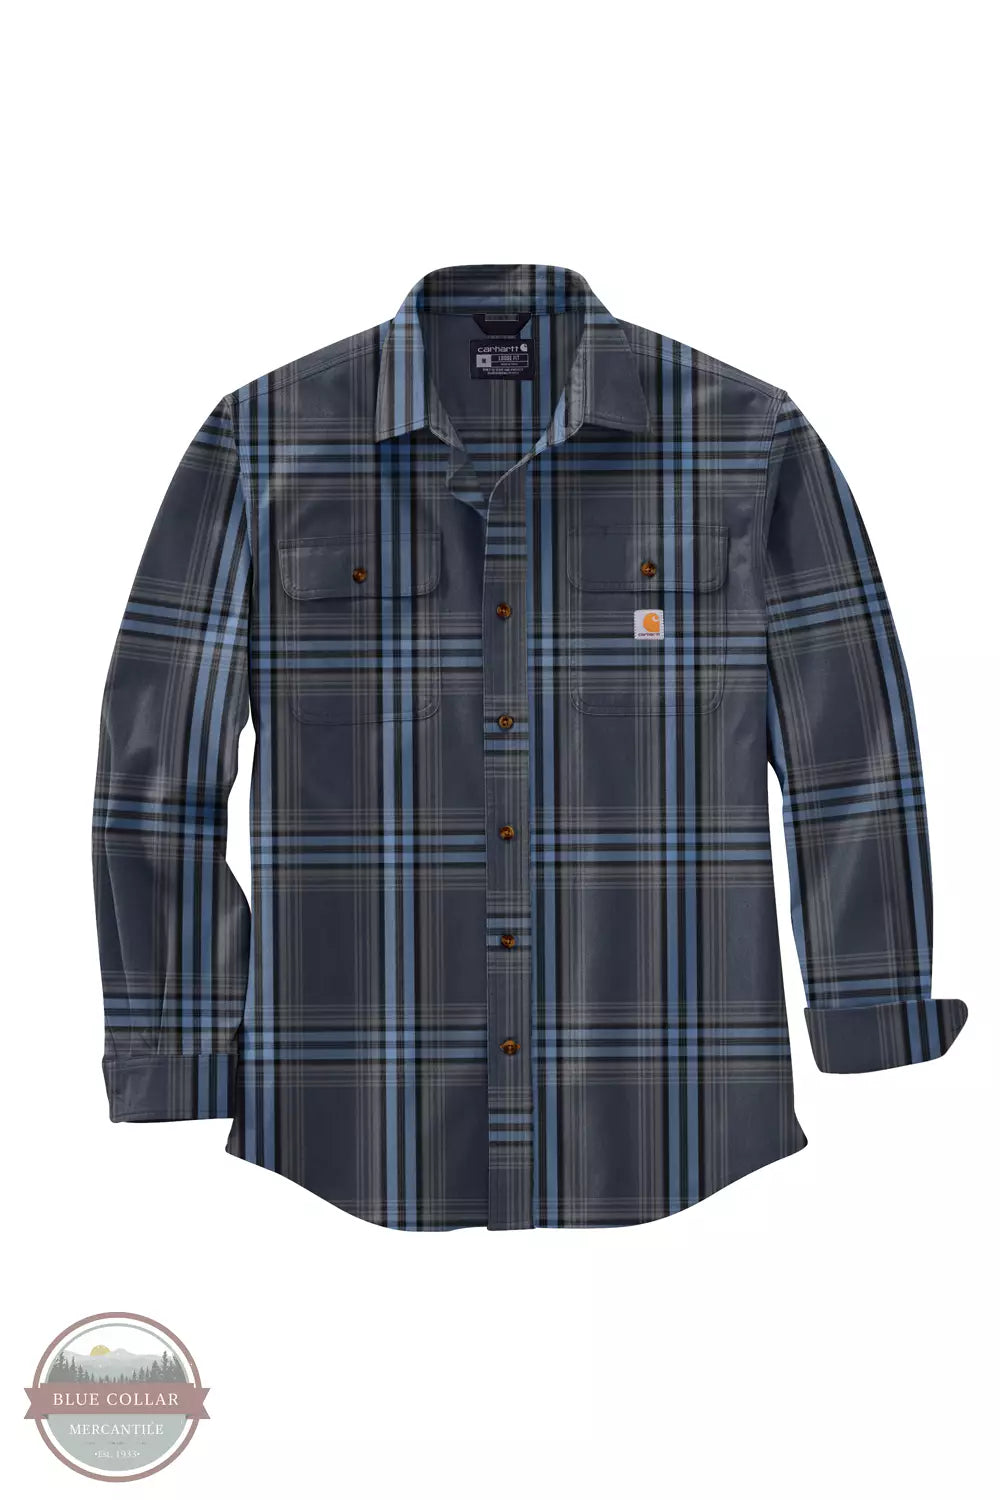 Carhartt 105947 Loose Fit Heavyweight Flannel Button Down Long Sleeve Shirt in Plaid Navy Front View